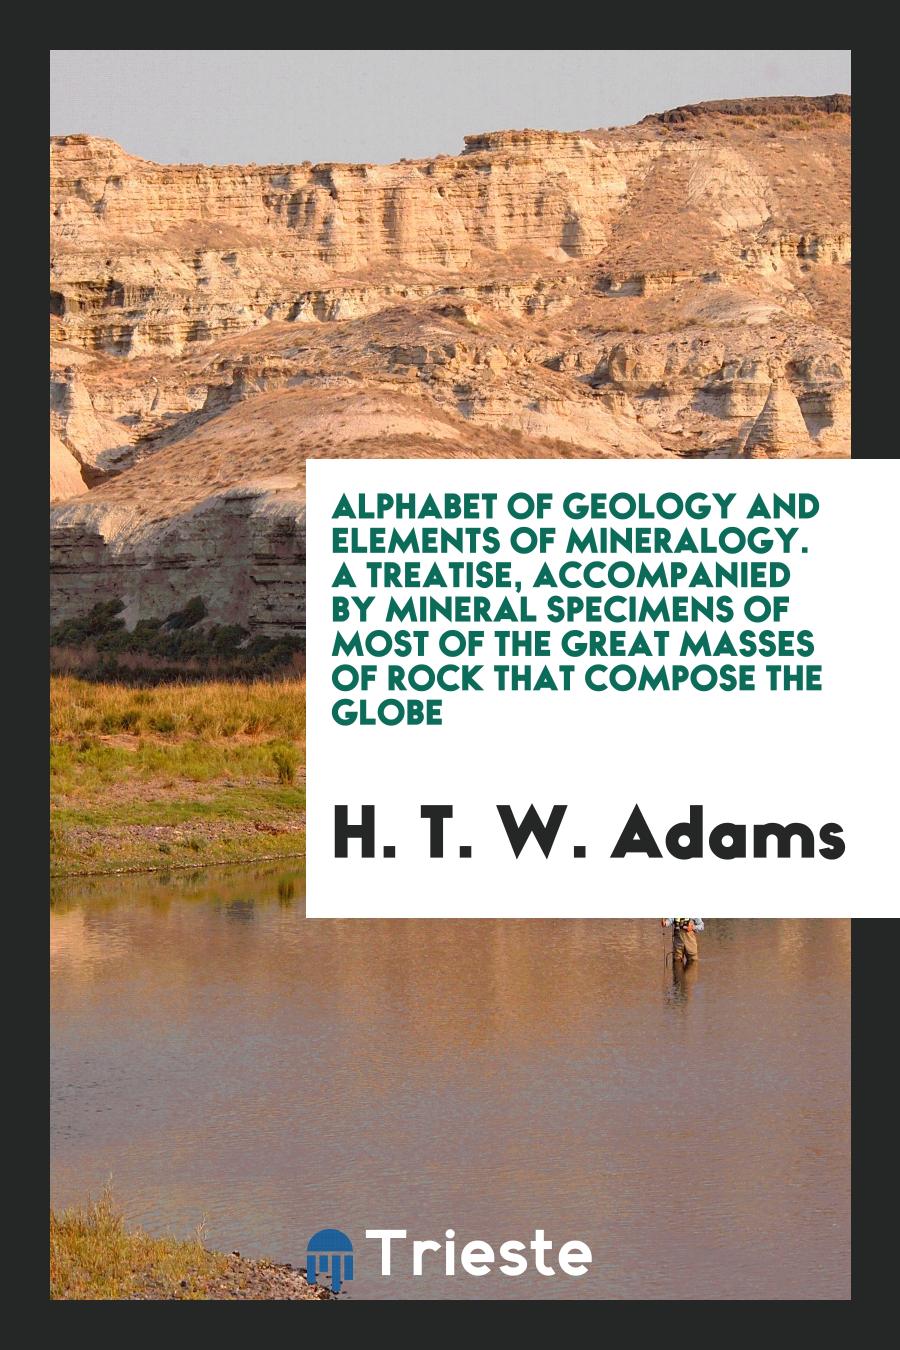 Alphabet of Geology and Elements of Mineralogy. A treatise, accompanied by Mineral Specimens of most of the Great Masses of Rock that Compose the Globe